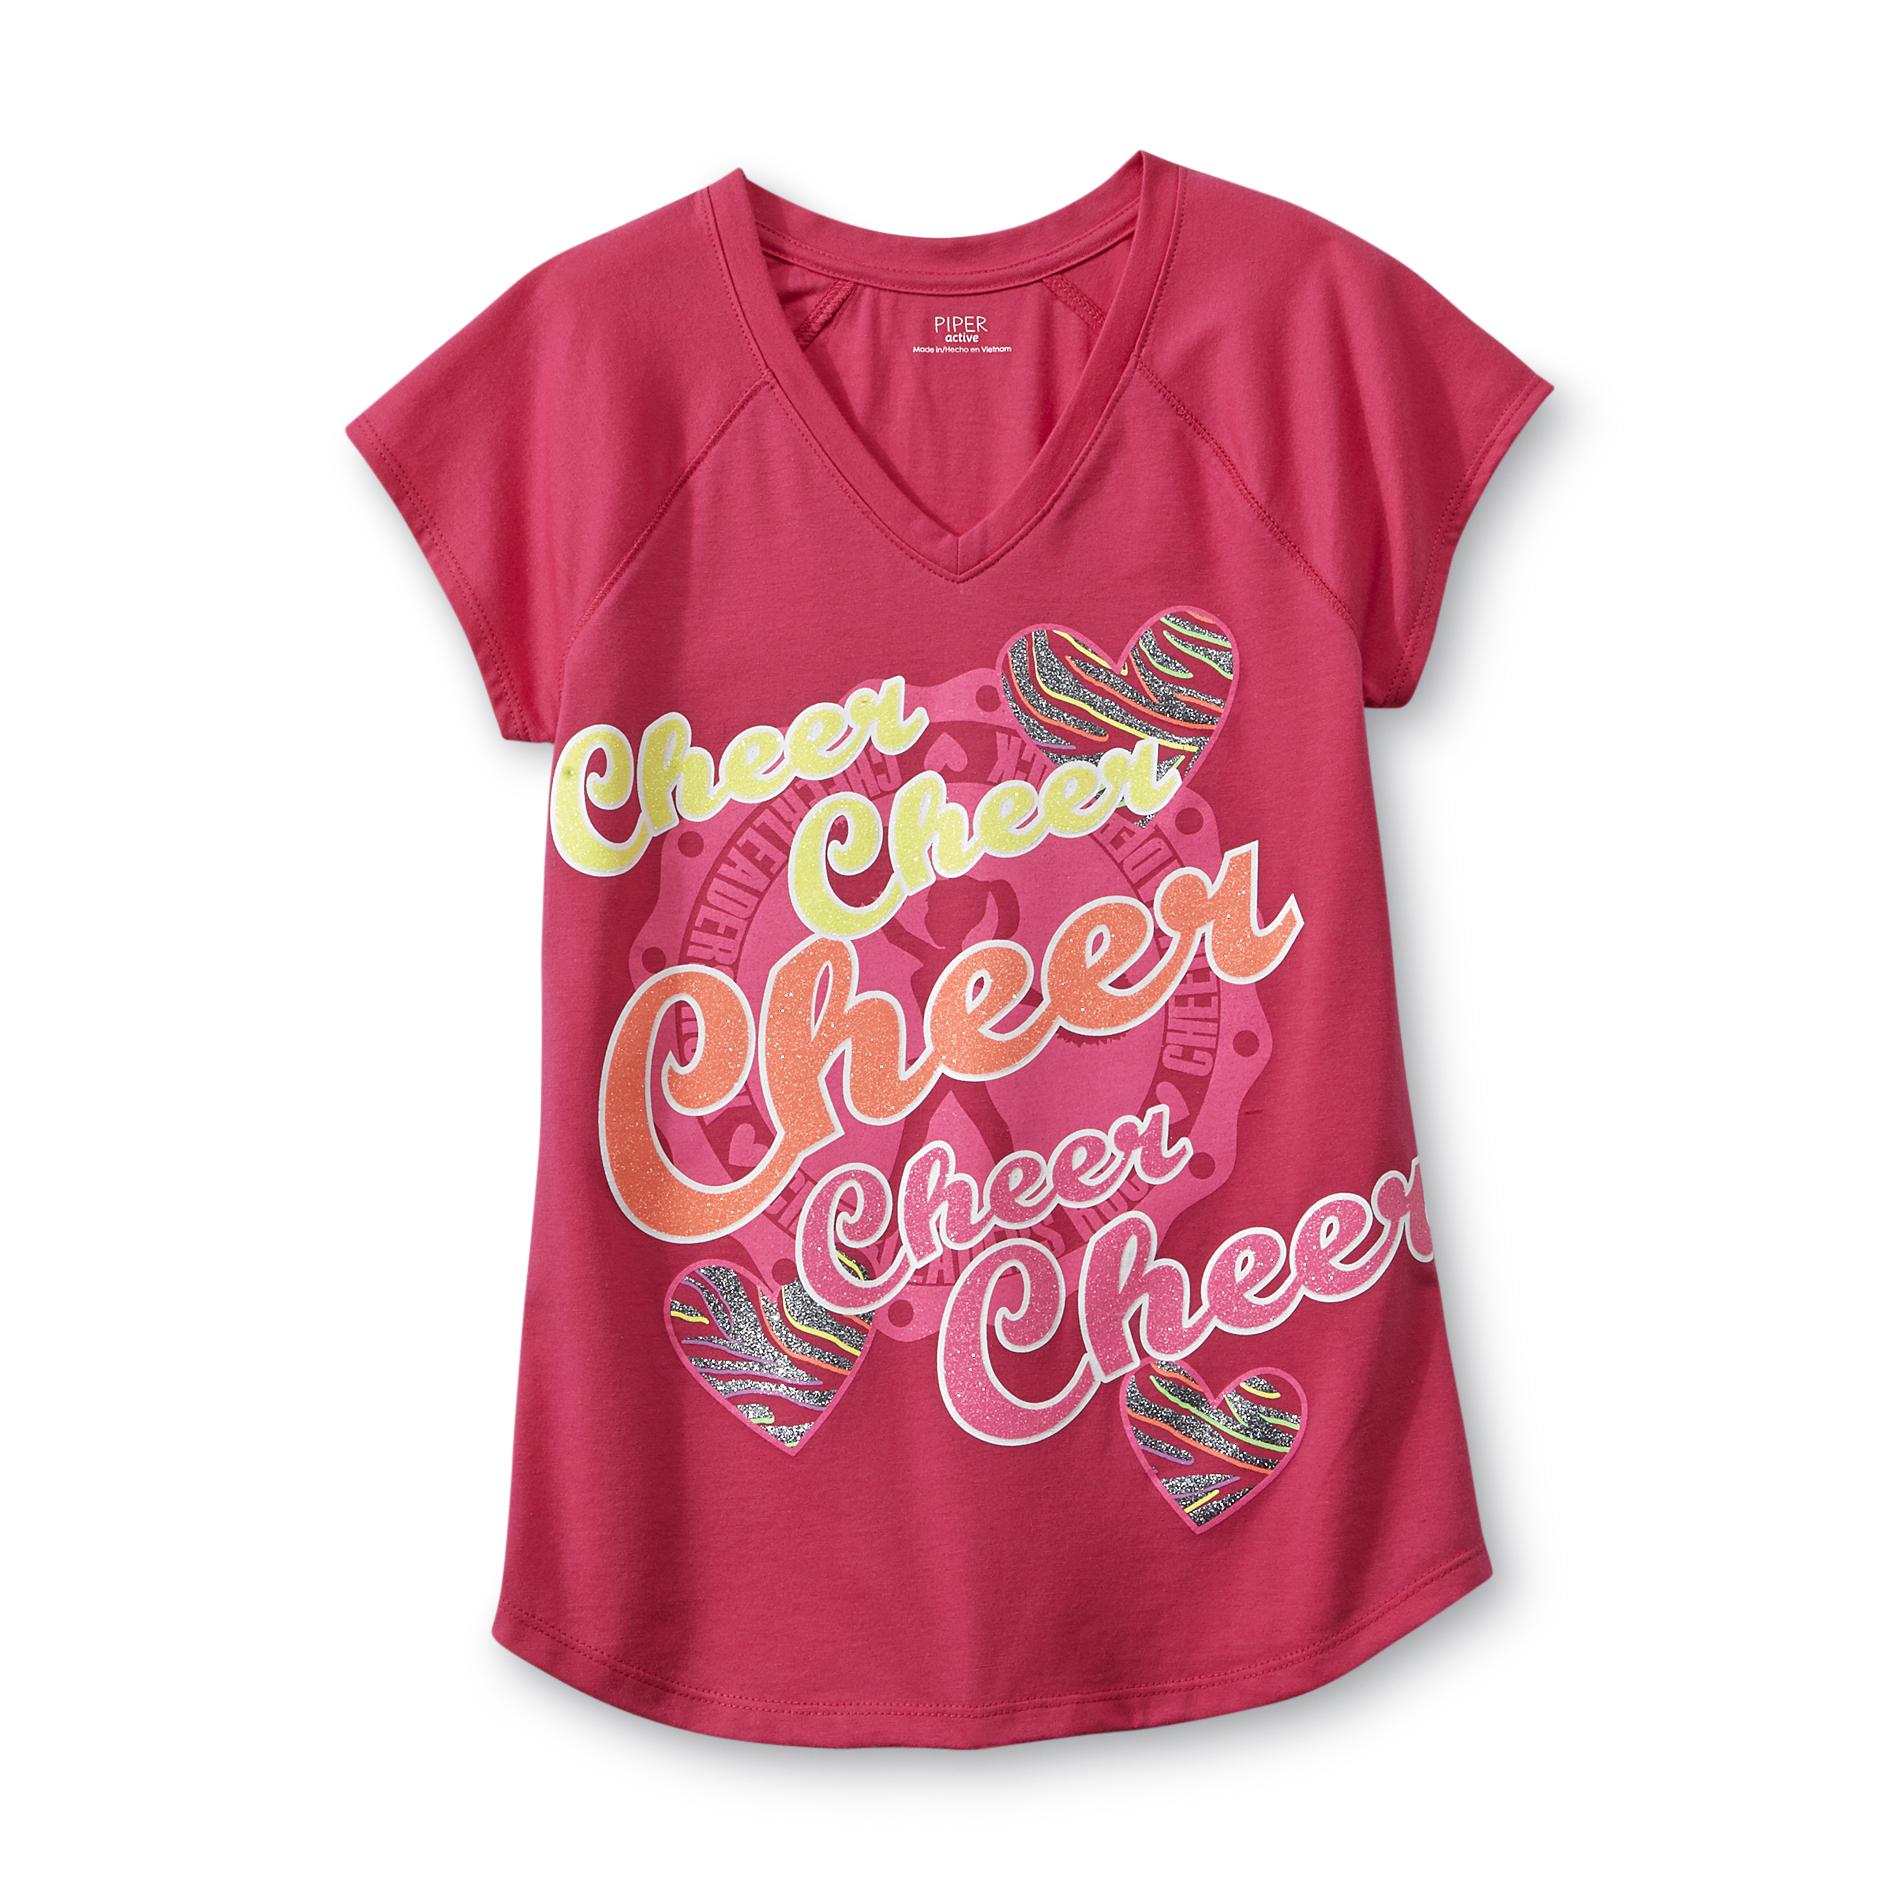 Piper Active Girl's Graphic T-Shirt - Cheer